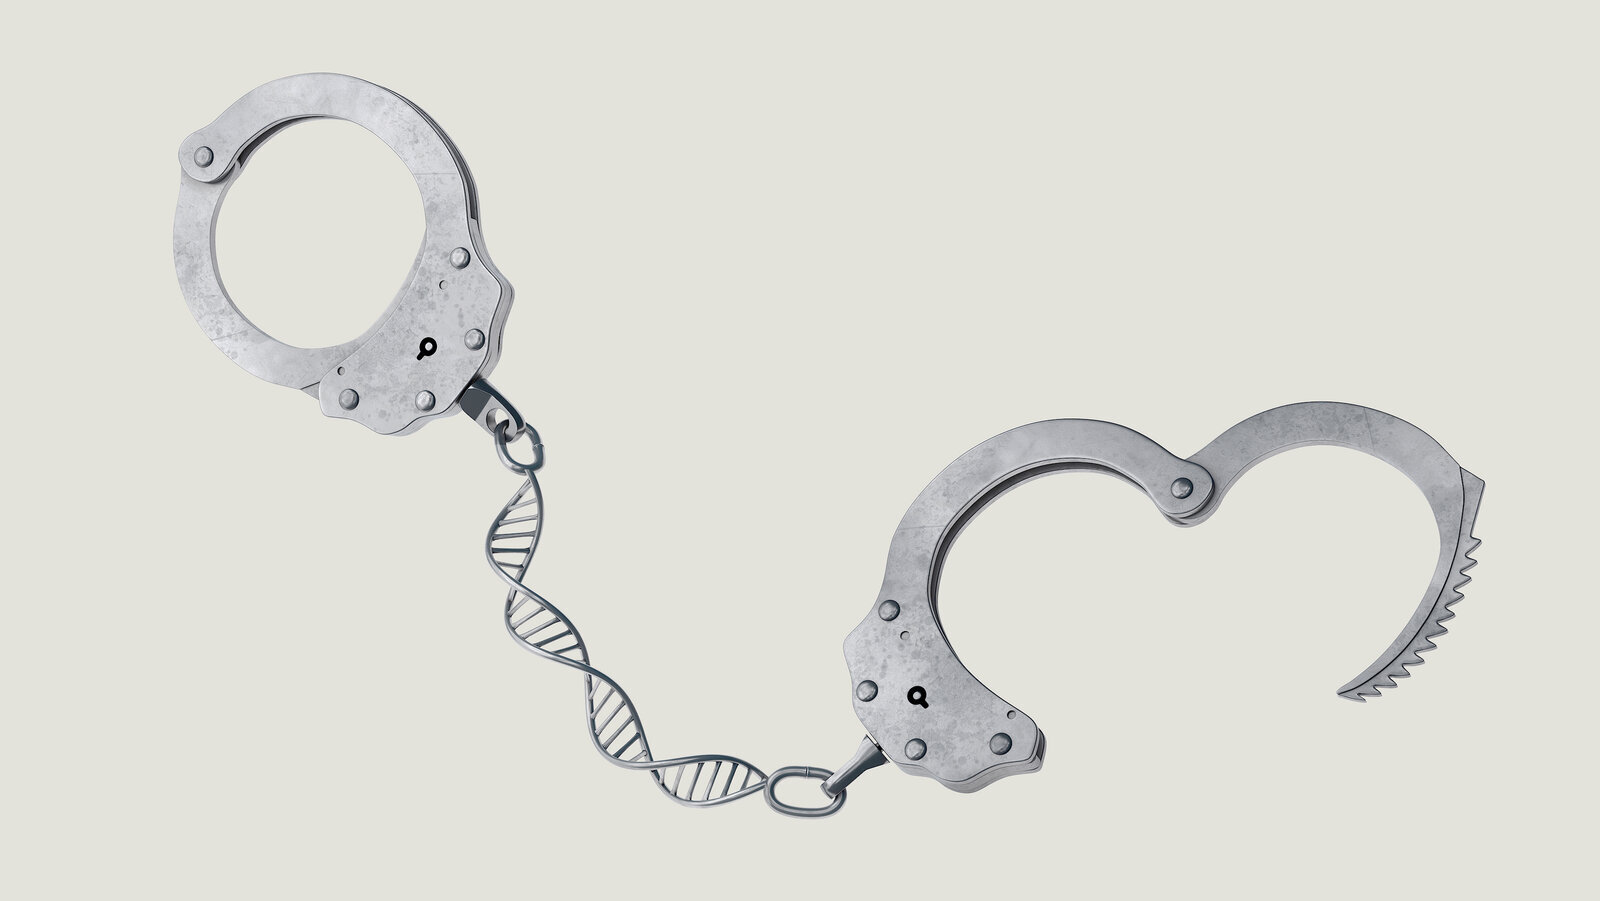 [IMAGE] Your DNA Test Could Send a Relative to Jail